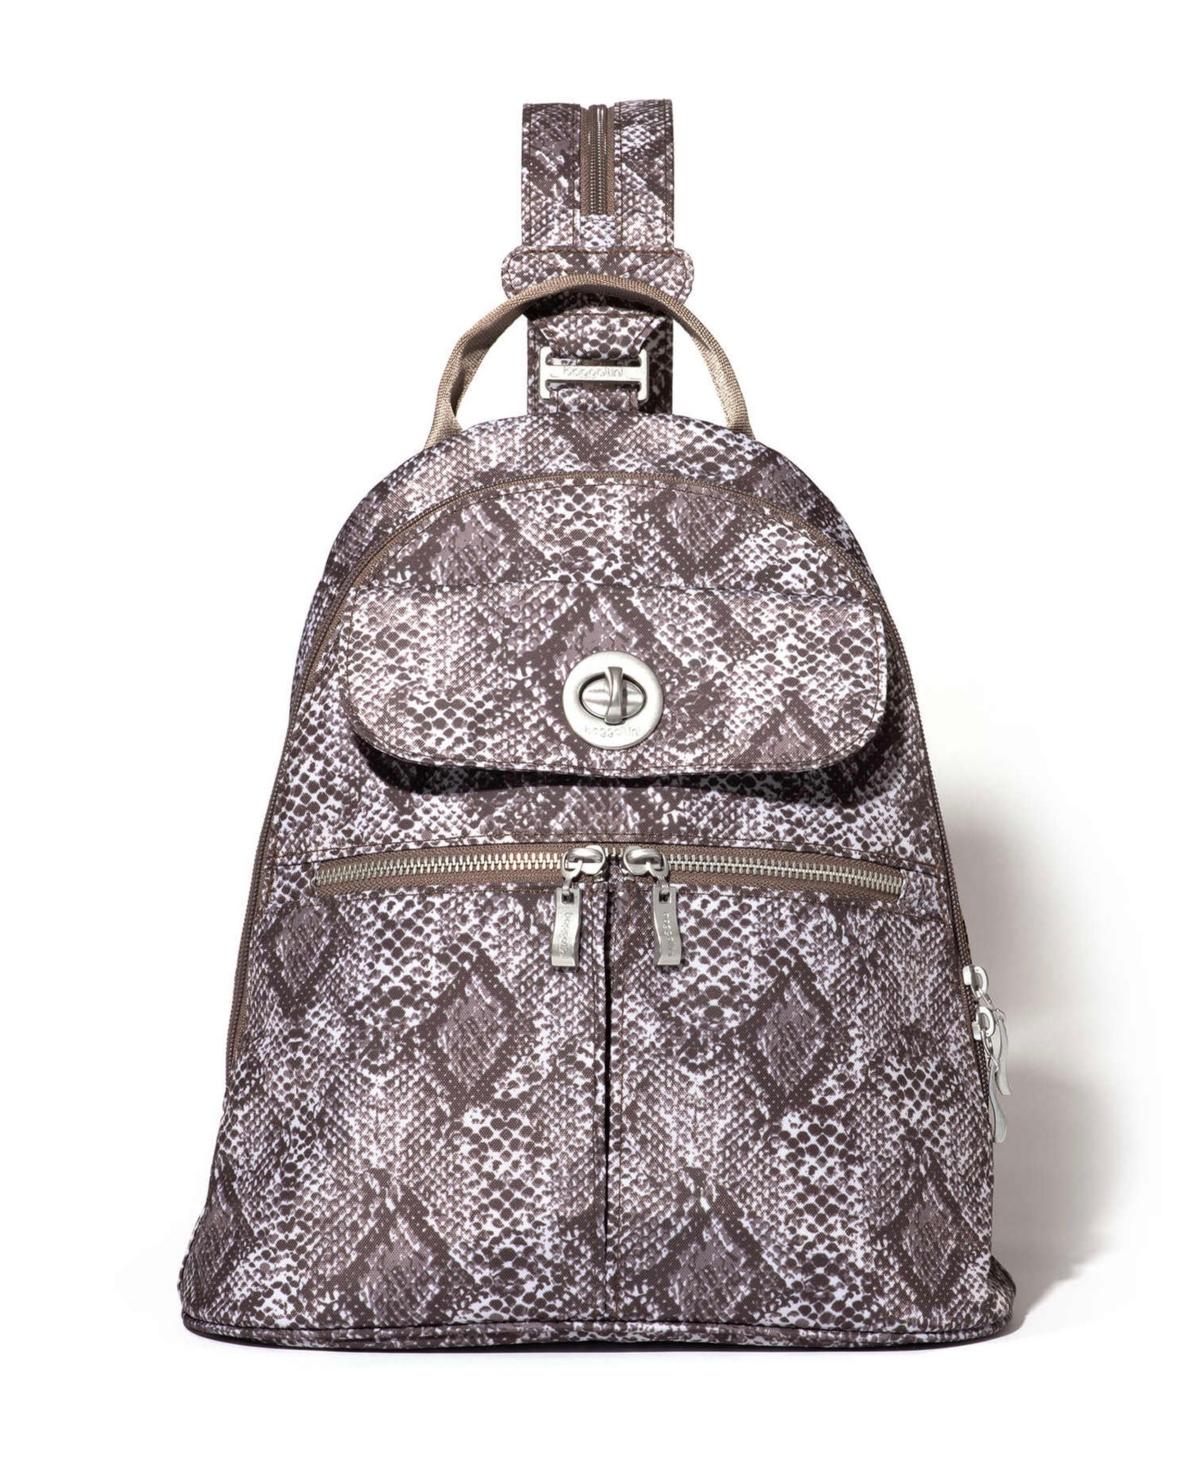 Baggallini Naples Convertible Backpack In Tan Python - Polyester